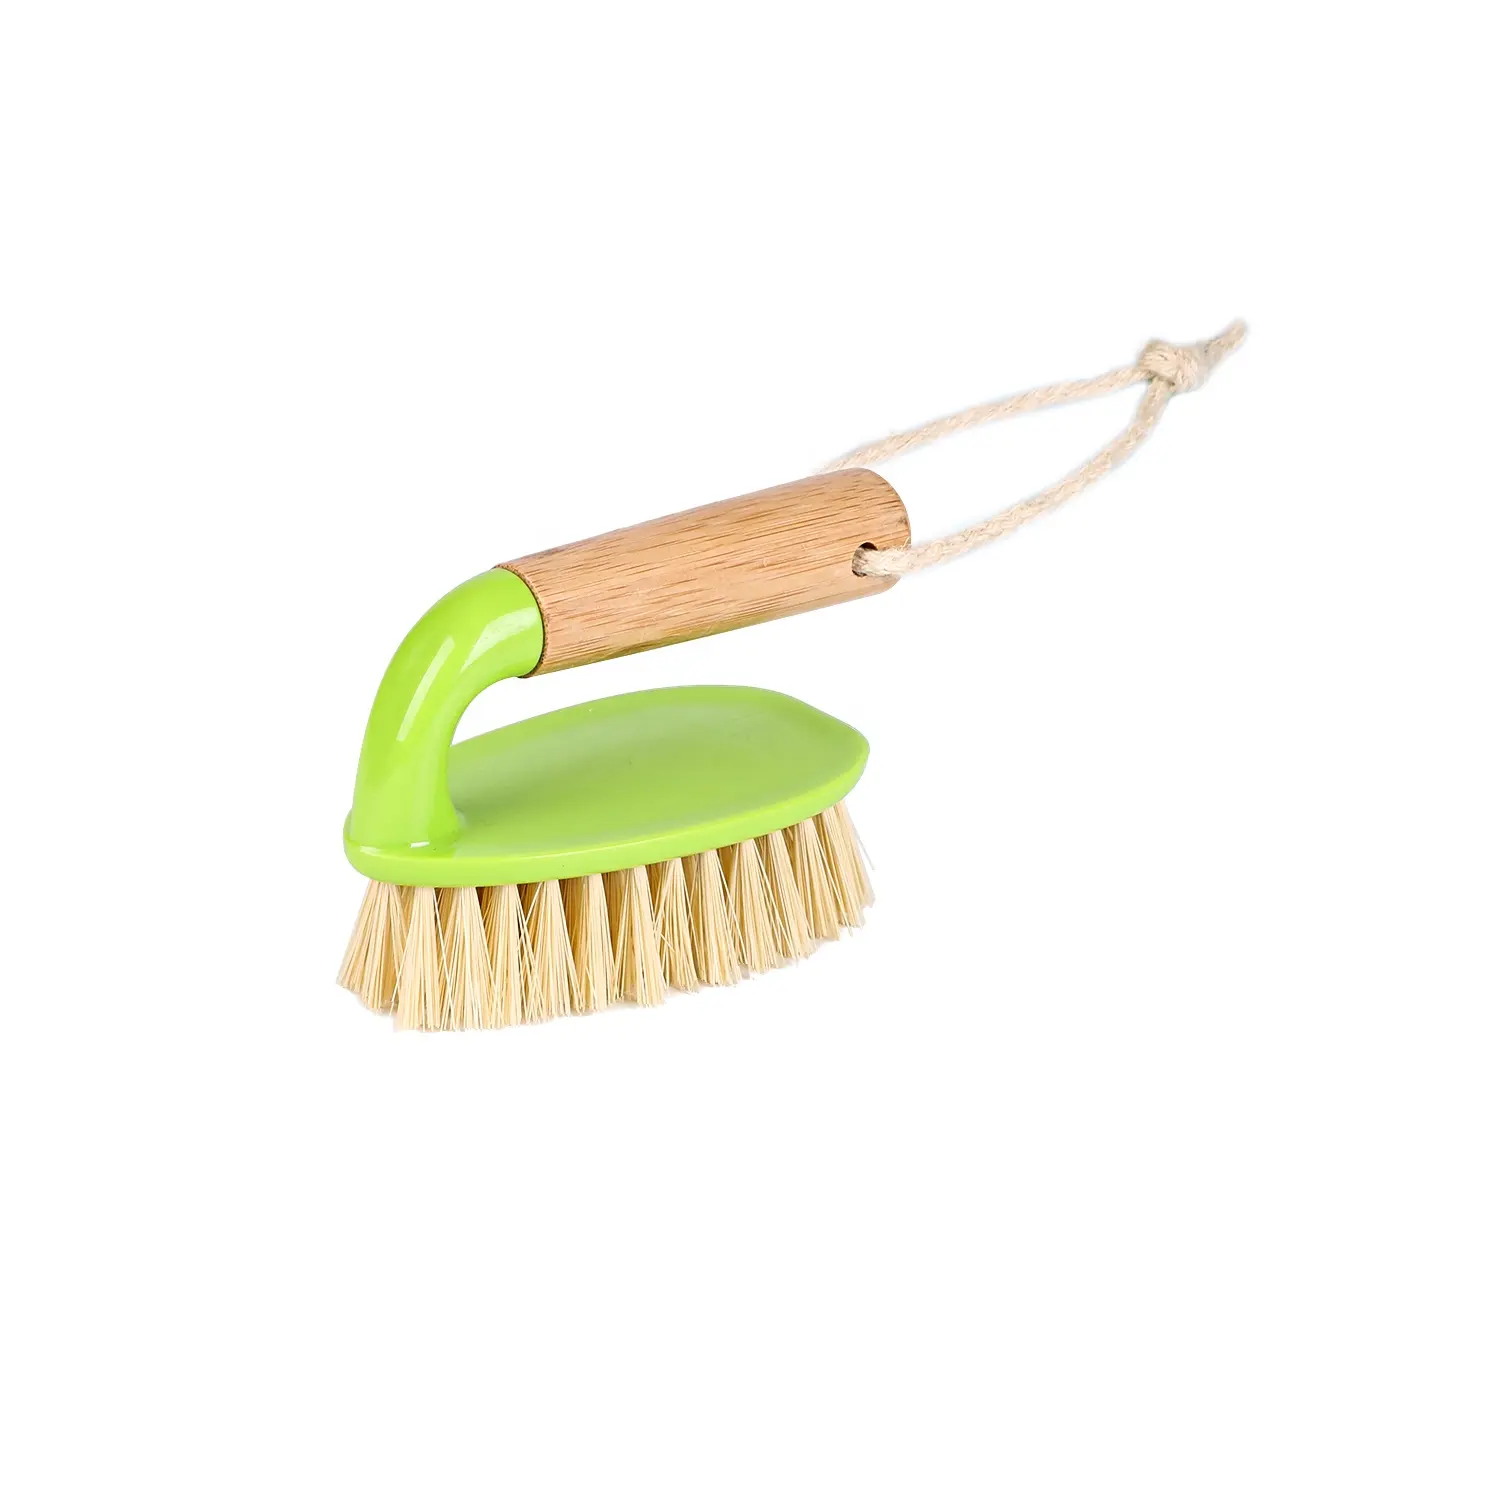 Eco-Friendly Natural Bamboo Oval Wooden Handle Brush Cleaning Scrub Brush For Shoe Bathroom Kitchen Home Corner Floor